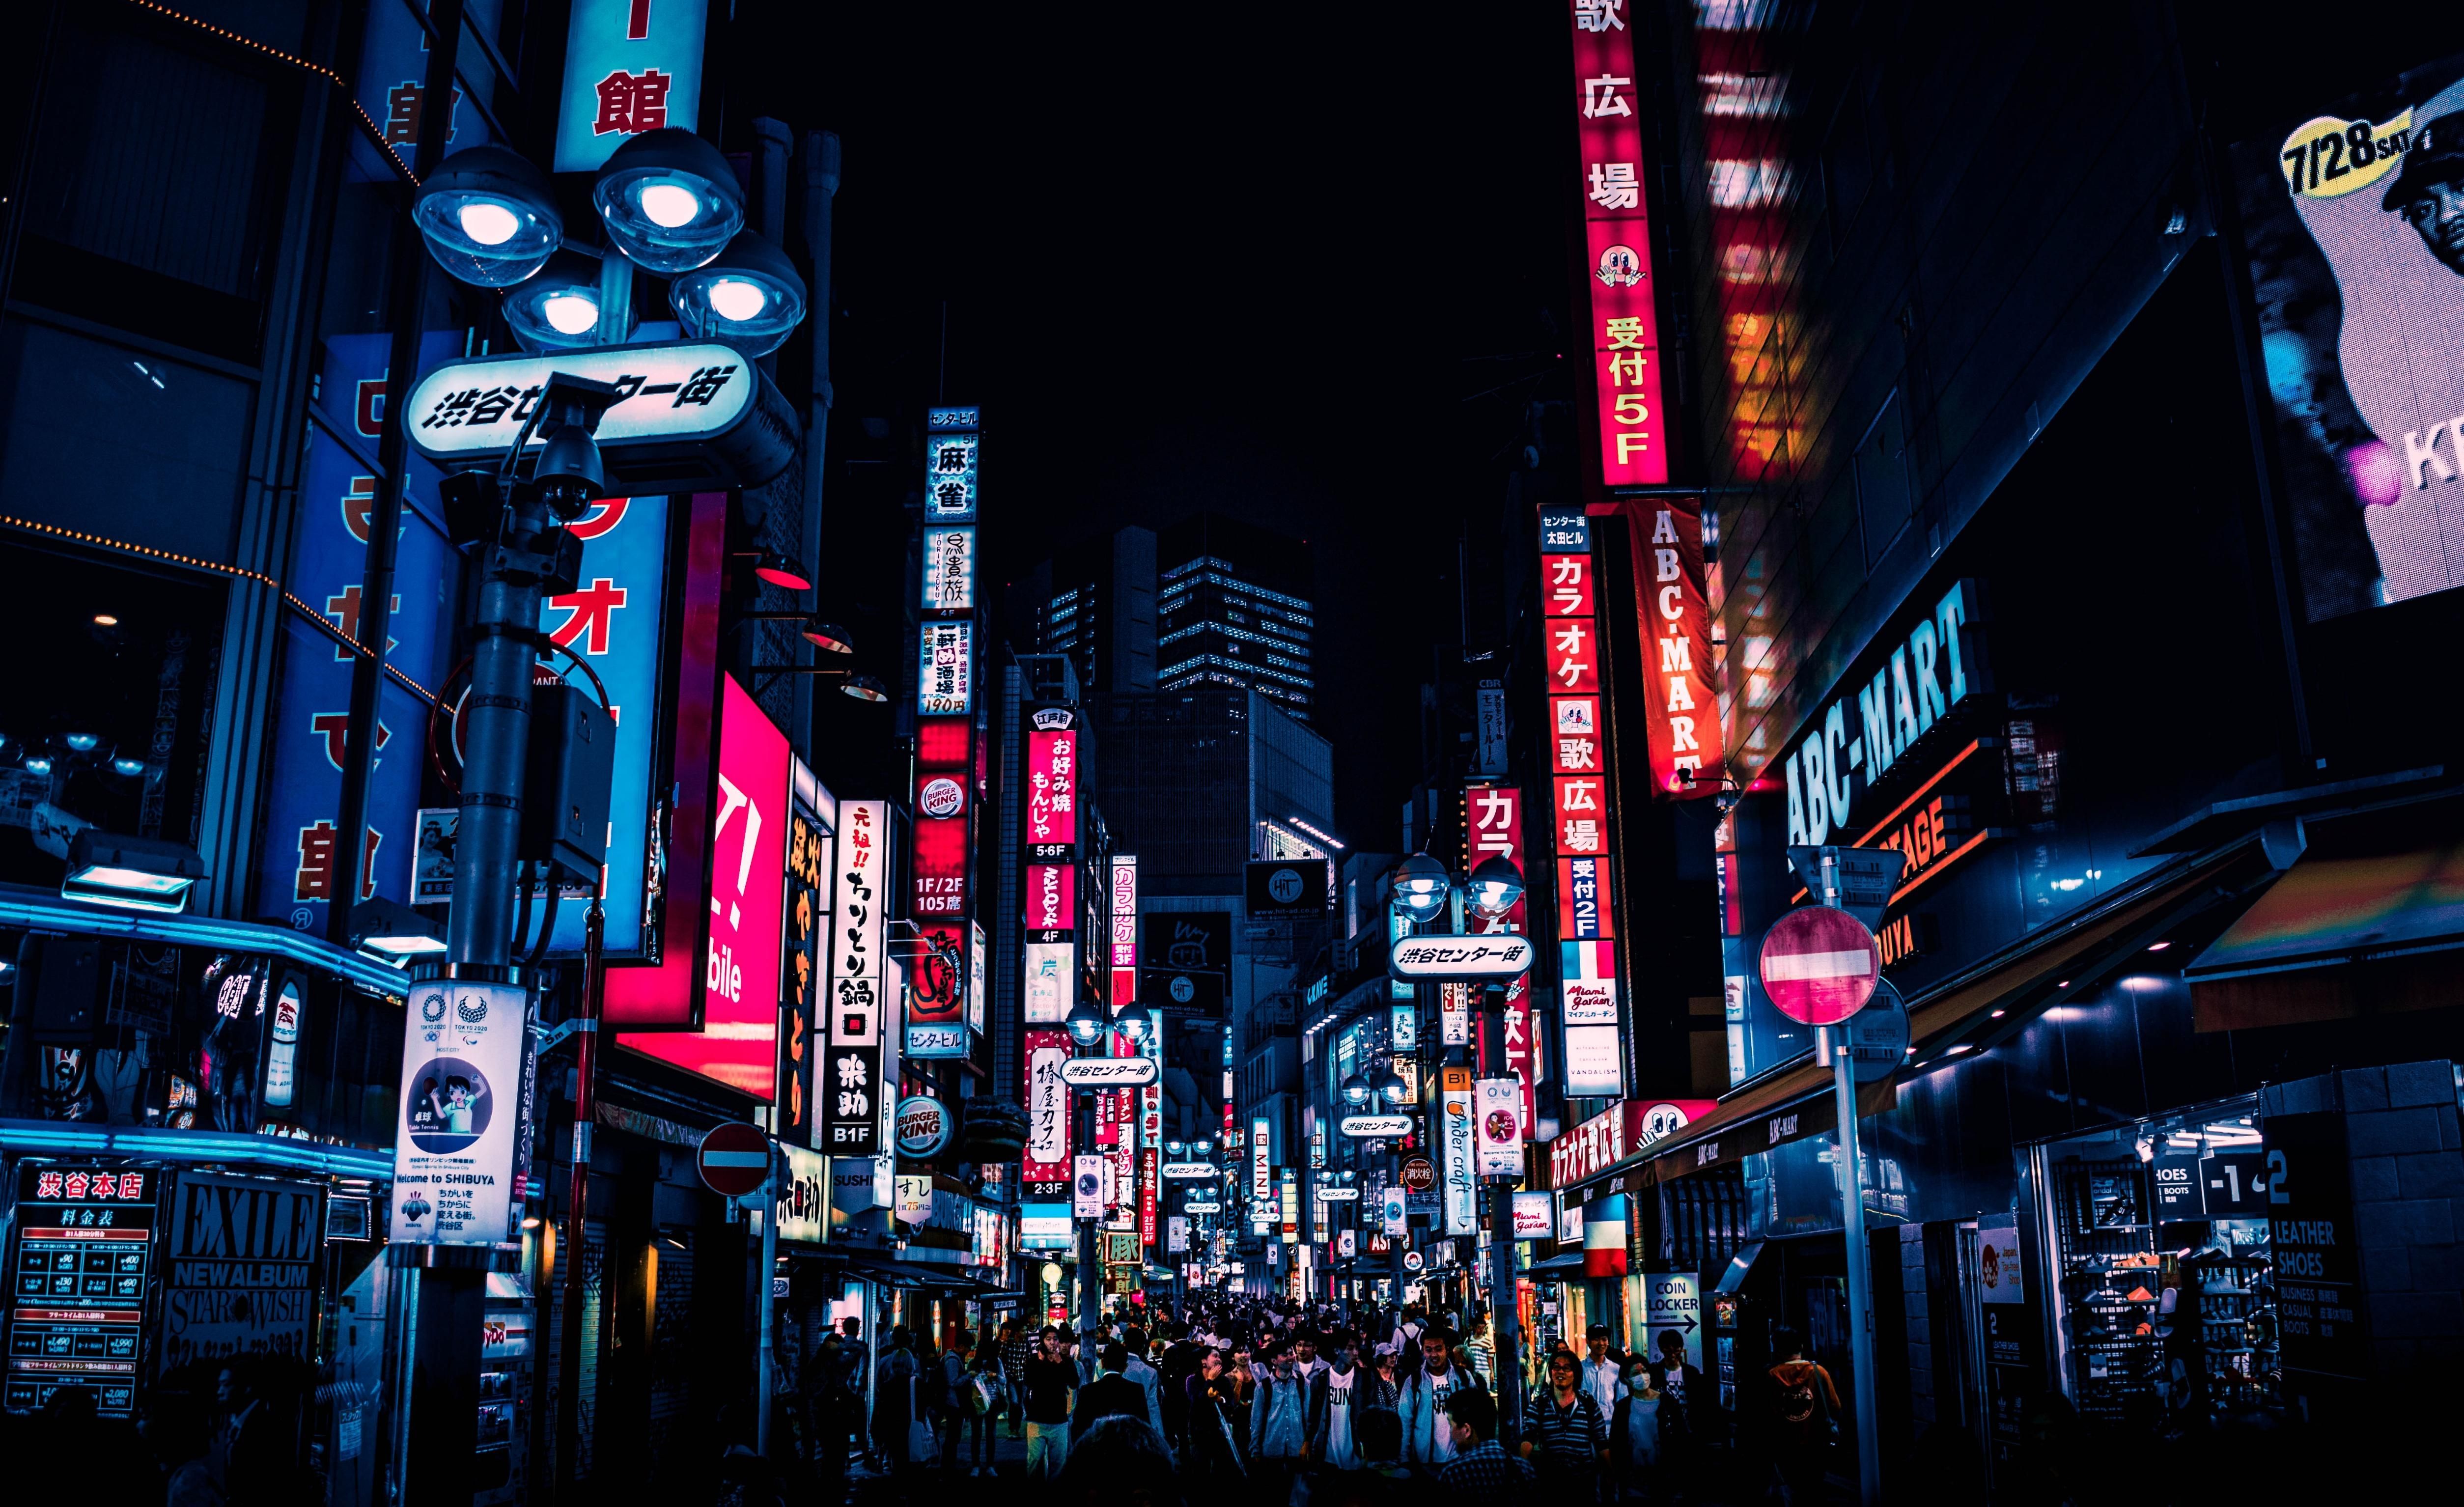 ITAP at night in the streets Tokyo. Tokyo night